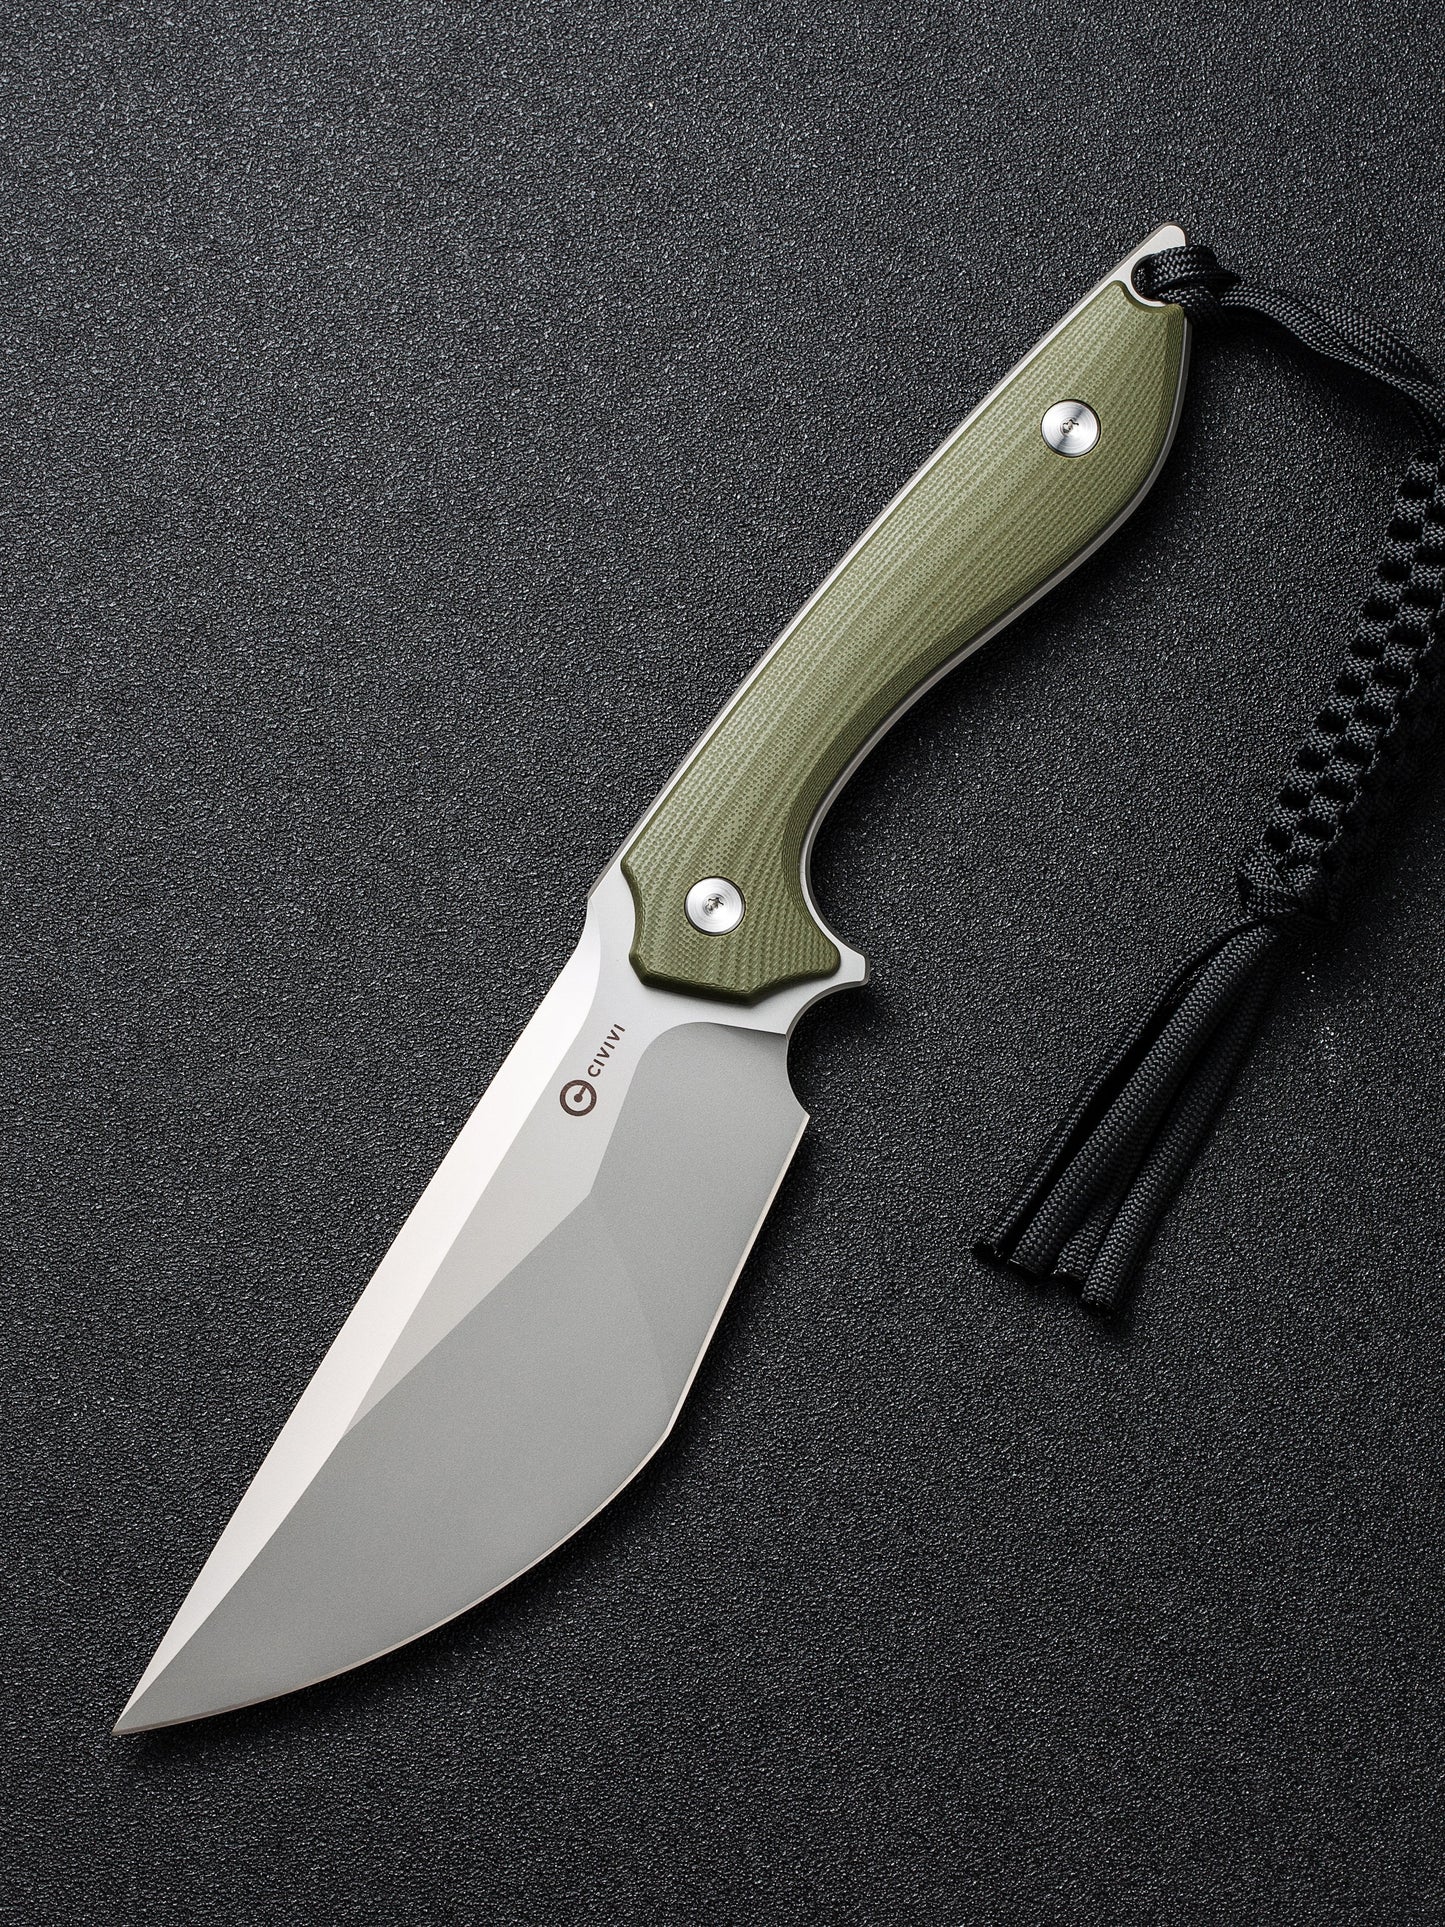 Civivi Concept 22 4.88" D2 OD Green G10 Fixed Blade Knife by Tuffknives C21047-2